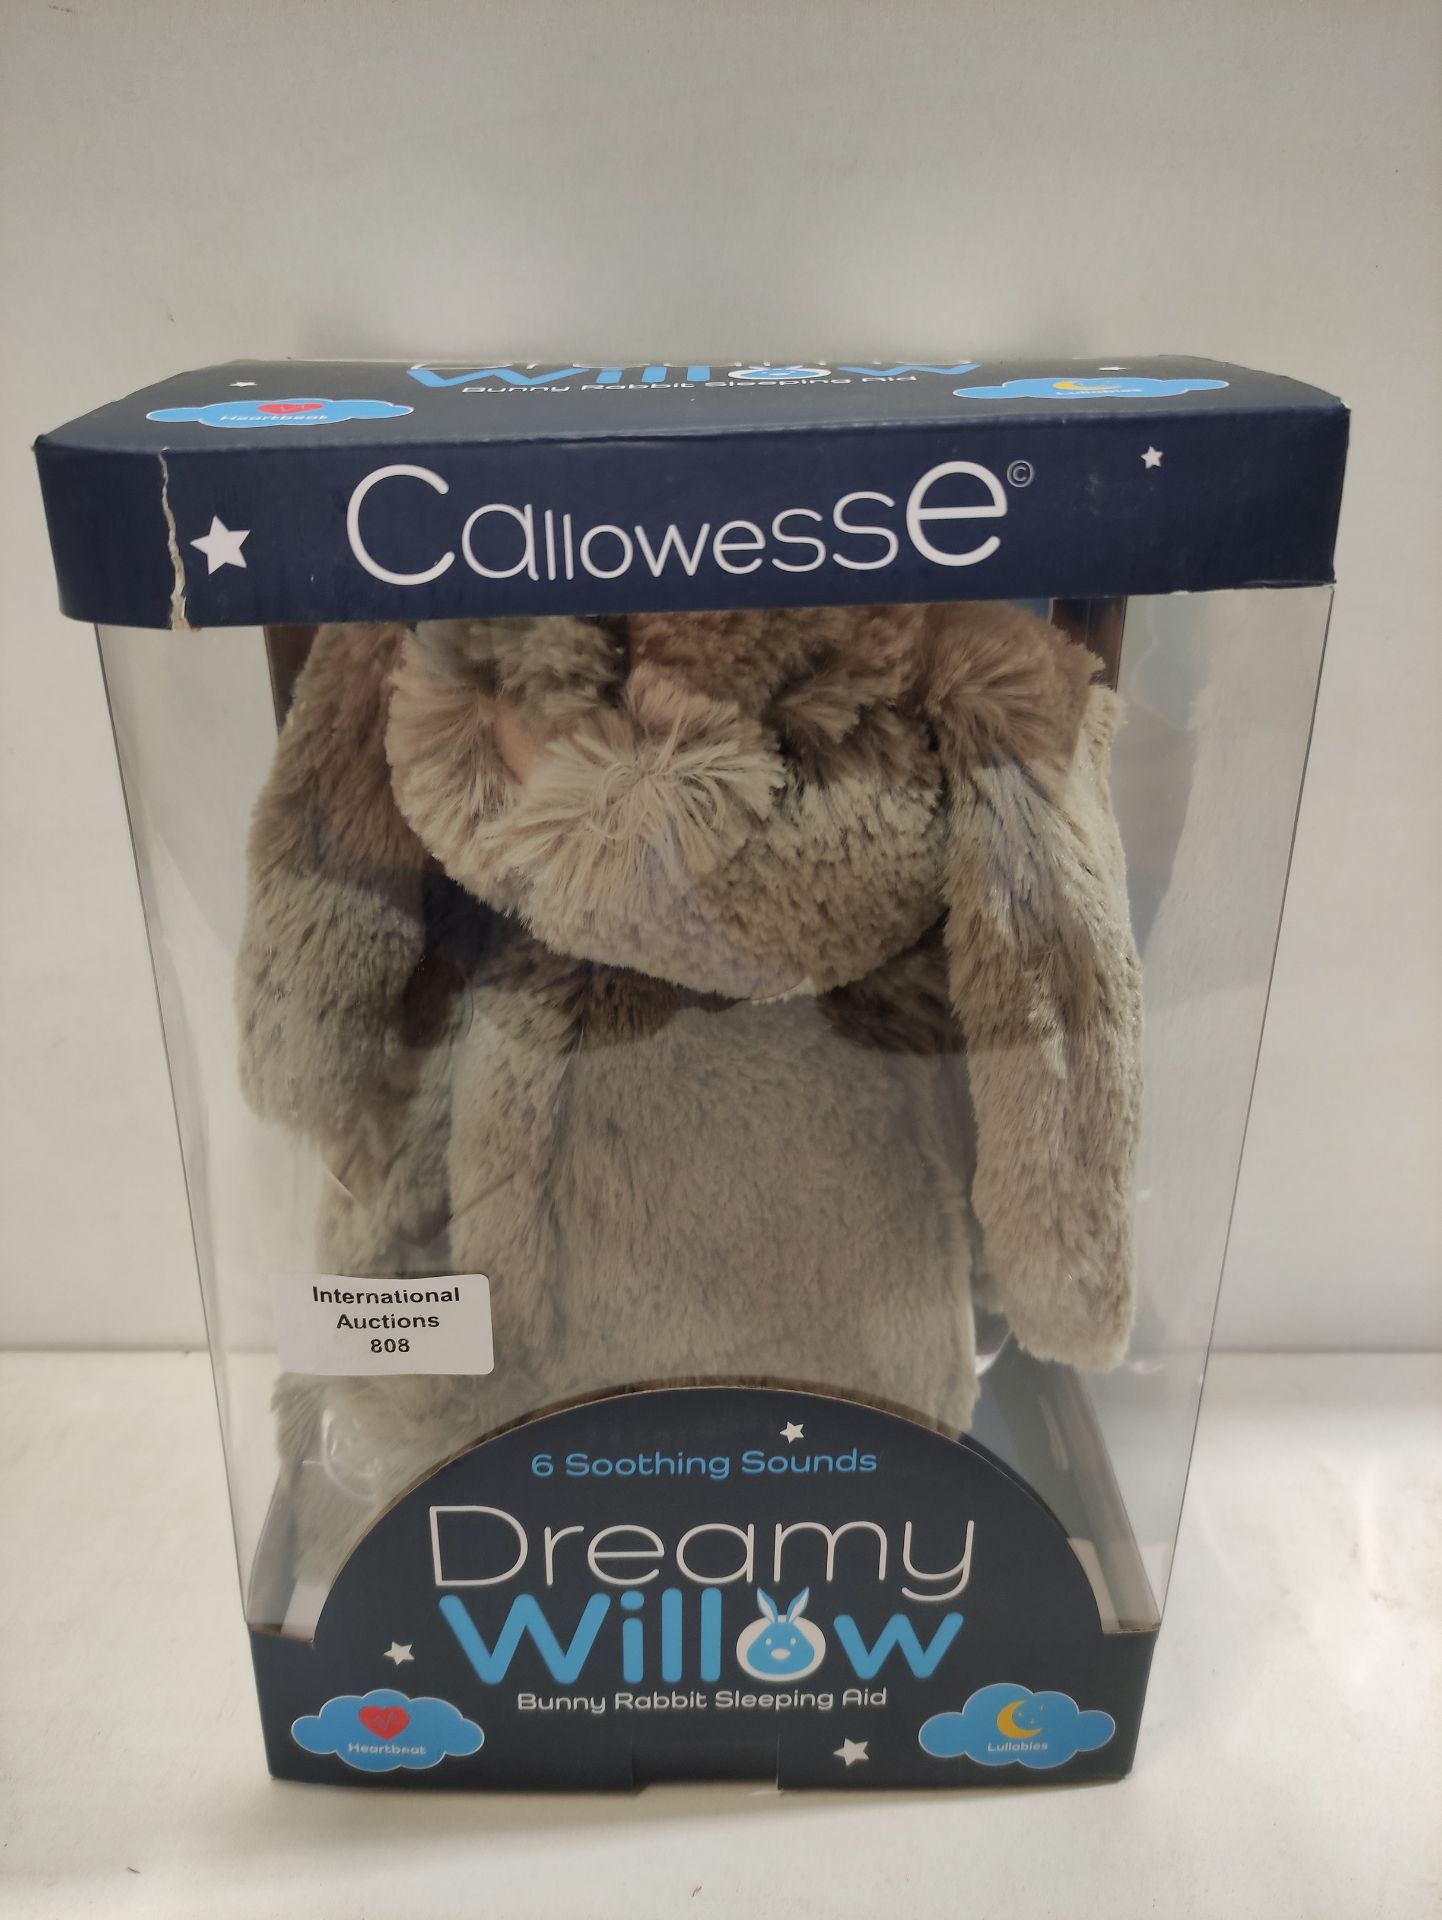 RRP £29.98 Callowesse Dreamy Willow Bunny Baby Sleep Aid with Smart Cry Sensor - Image 2 of 2